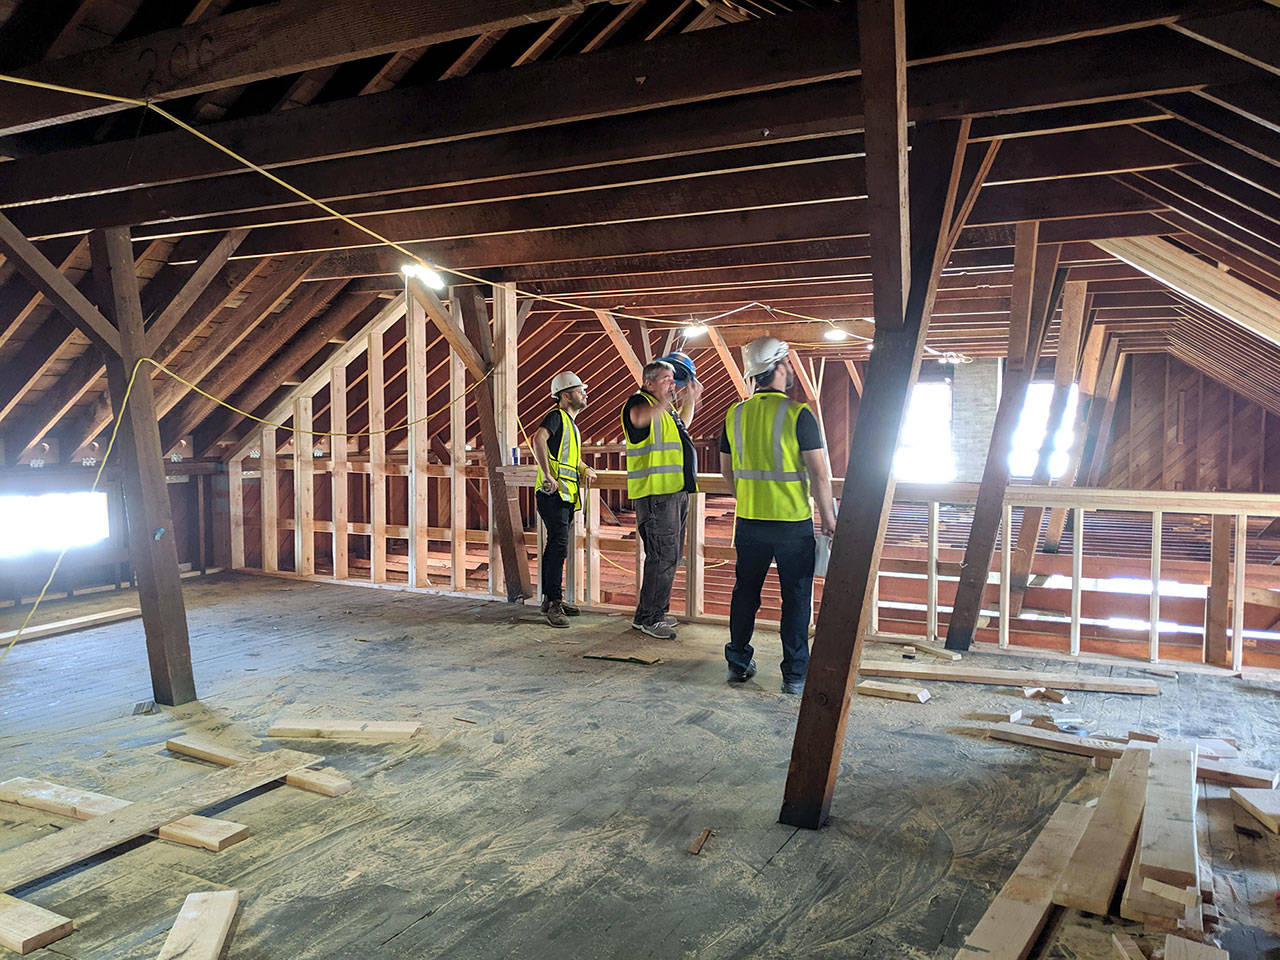 Clark Construction Group employees are seen in the attic of Building 305 at Fort Worden, which is currently being renovated as part of the Makers Square project. (Clark Construction Group)